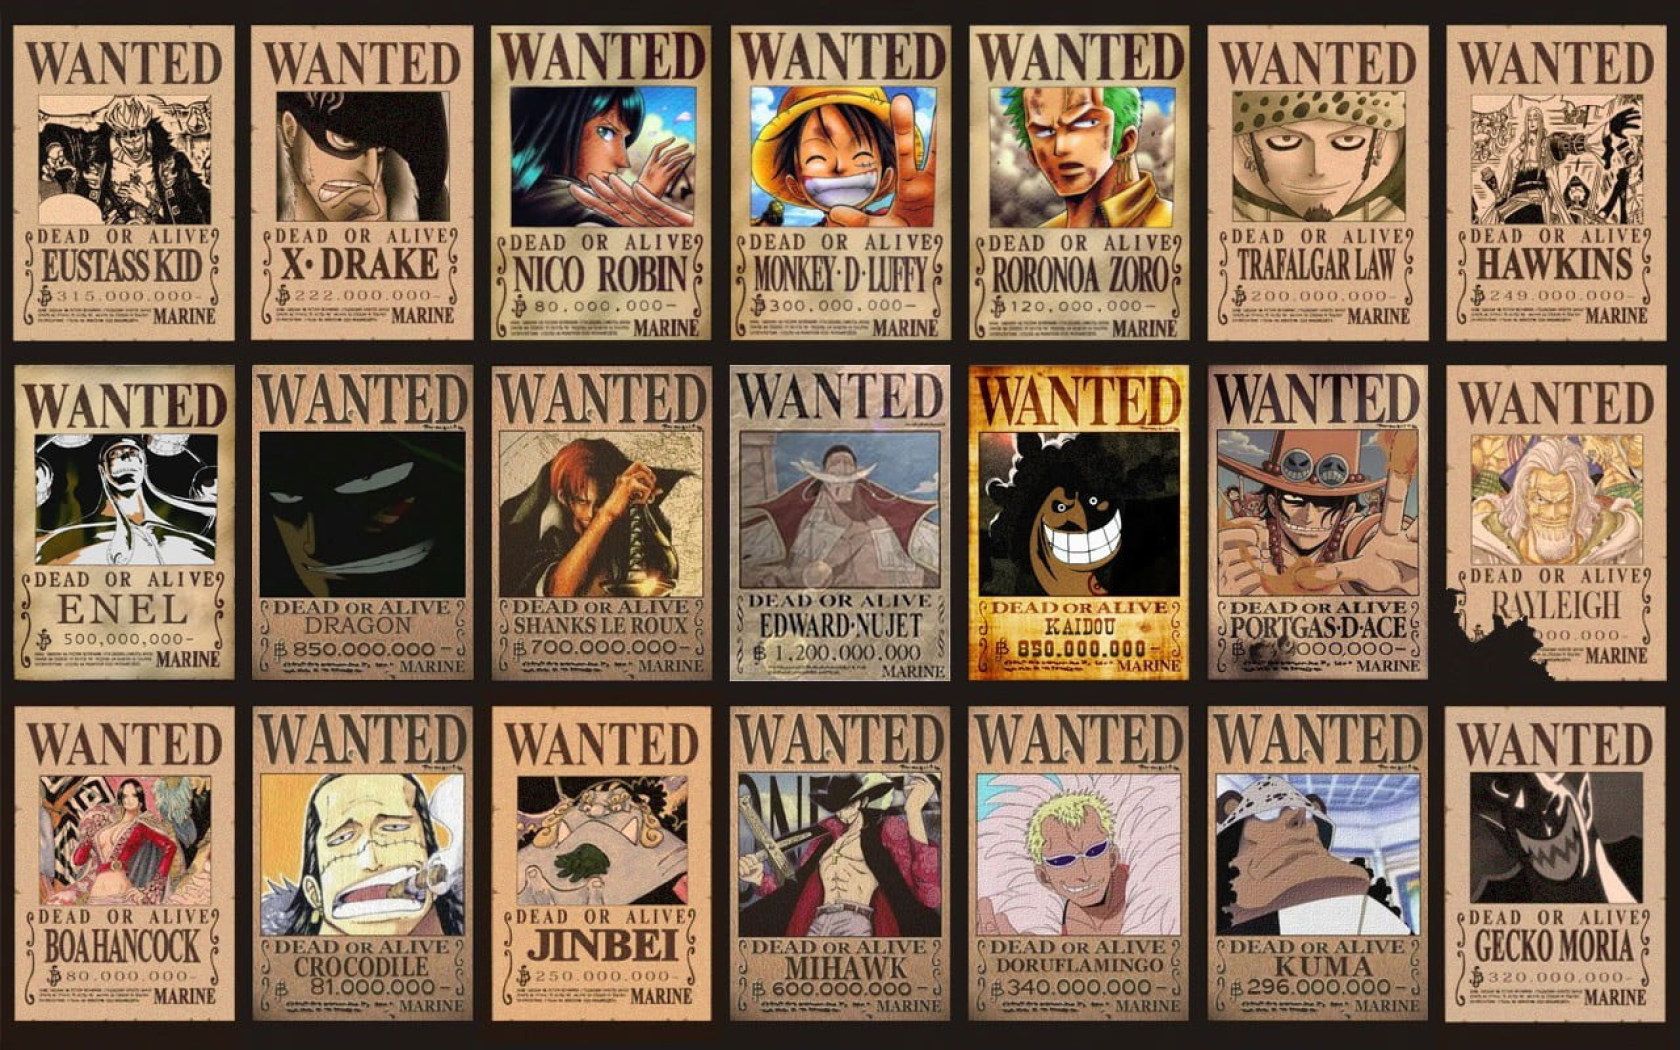 List of All One Piece Characters (Updated)